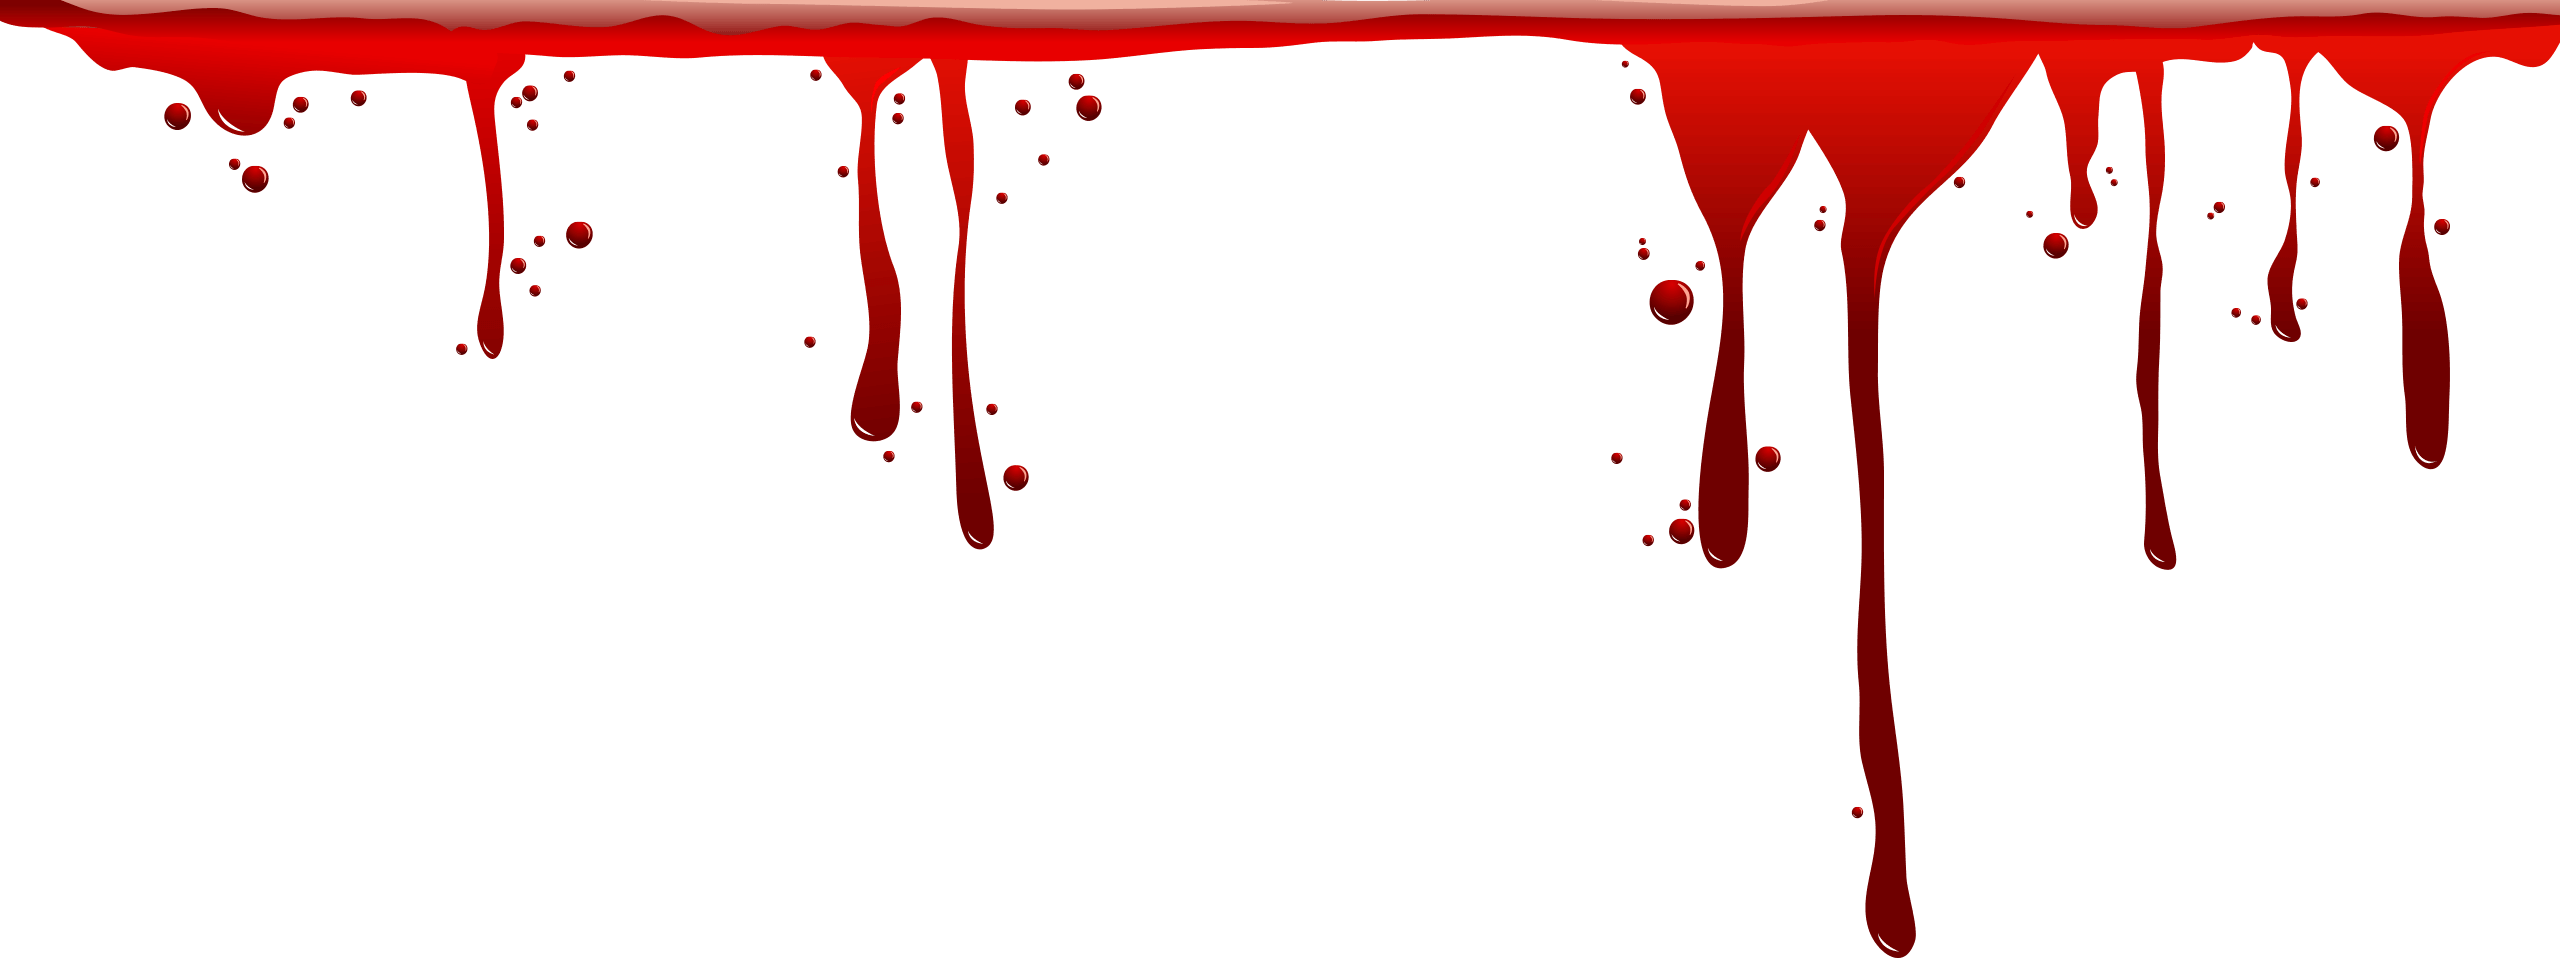 Blood Dripping Transparent Background Background for Free PowerPoint